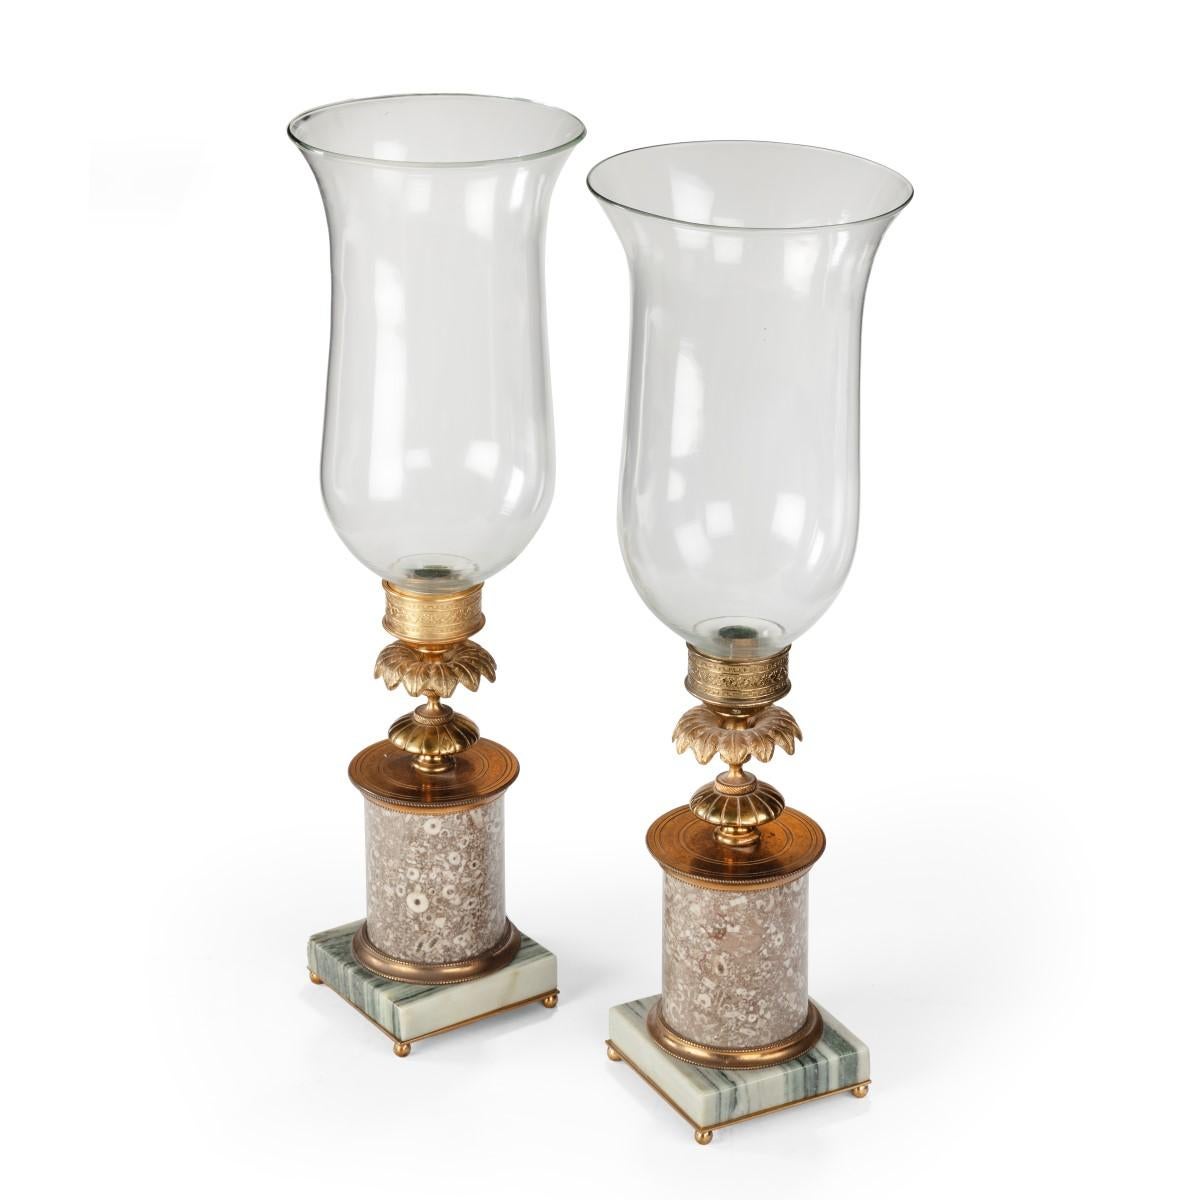 A pair of decorative storm lamps, each with a candle holder enclosed in a clear glass shade set on a turned gilt-brass support with a collar of petals and a cylindrical marble column, the rectangular base of striped marble. English, early 19th